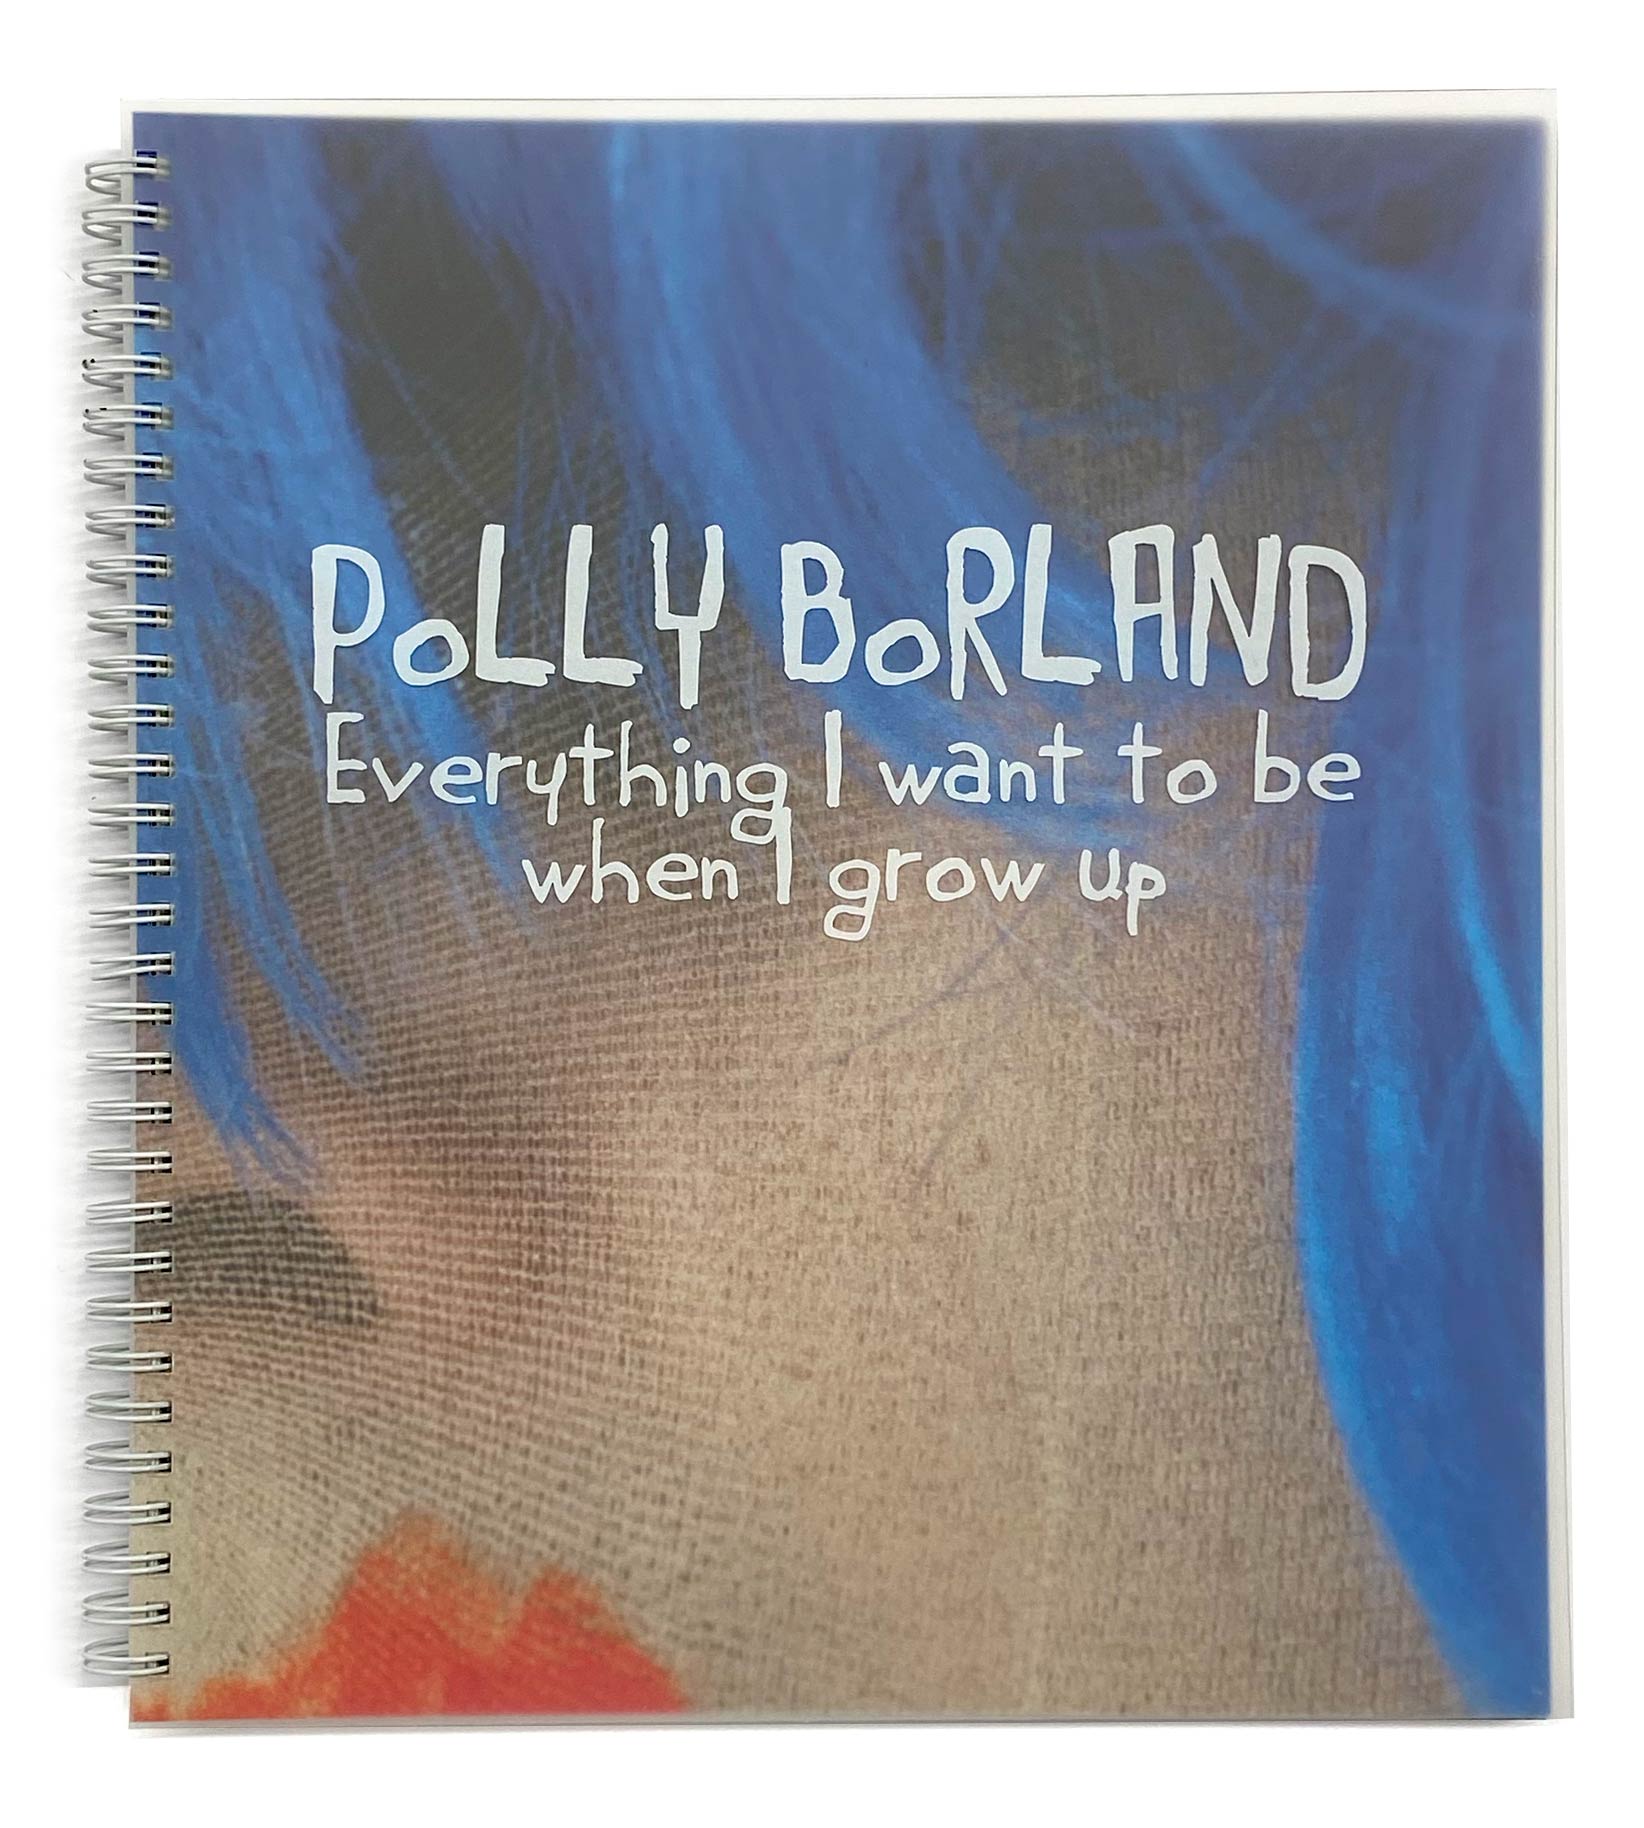 Polly Borland, Everything I want to be when I grow up